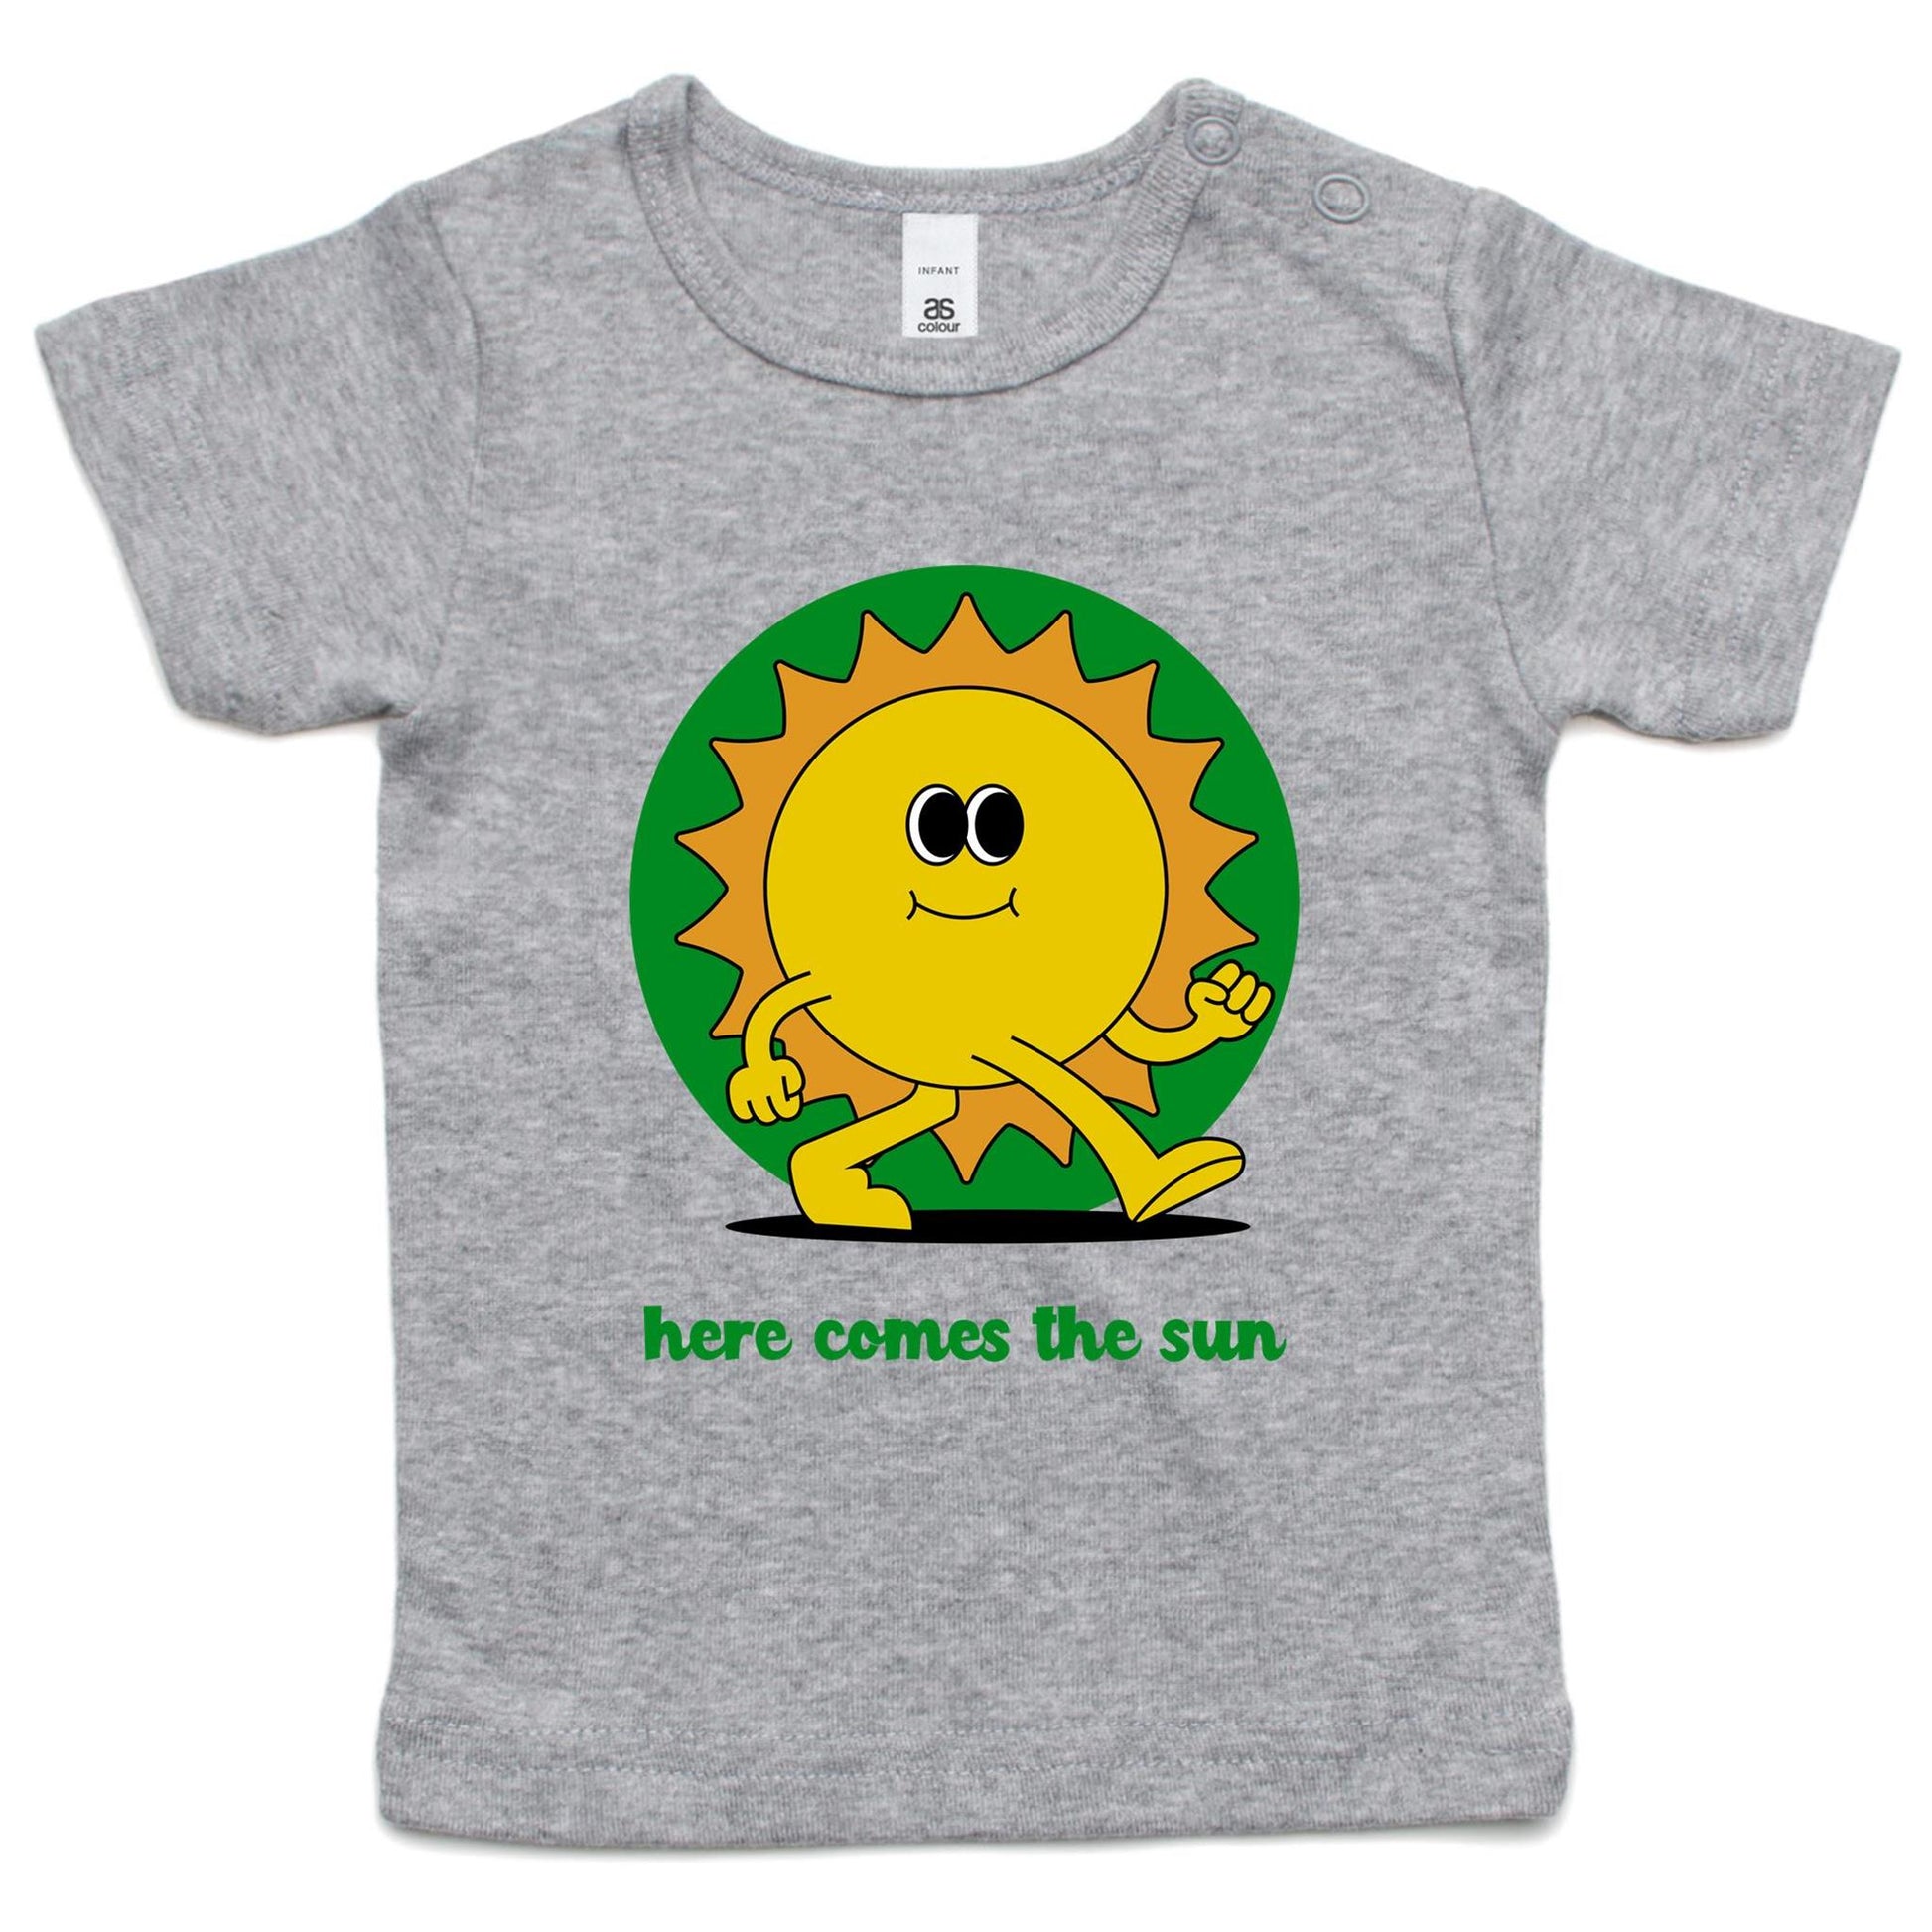 Here Comes The Sun - Baby T-shirt Grey Marle Baby T-shirt Retro Summer